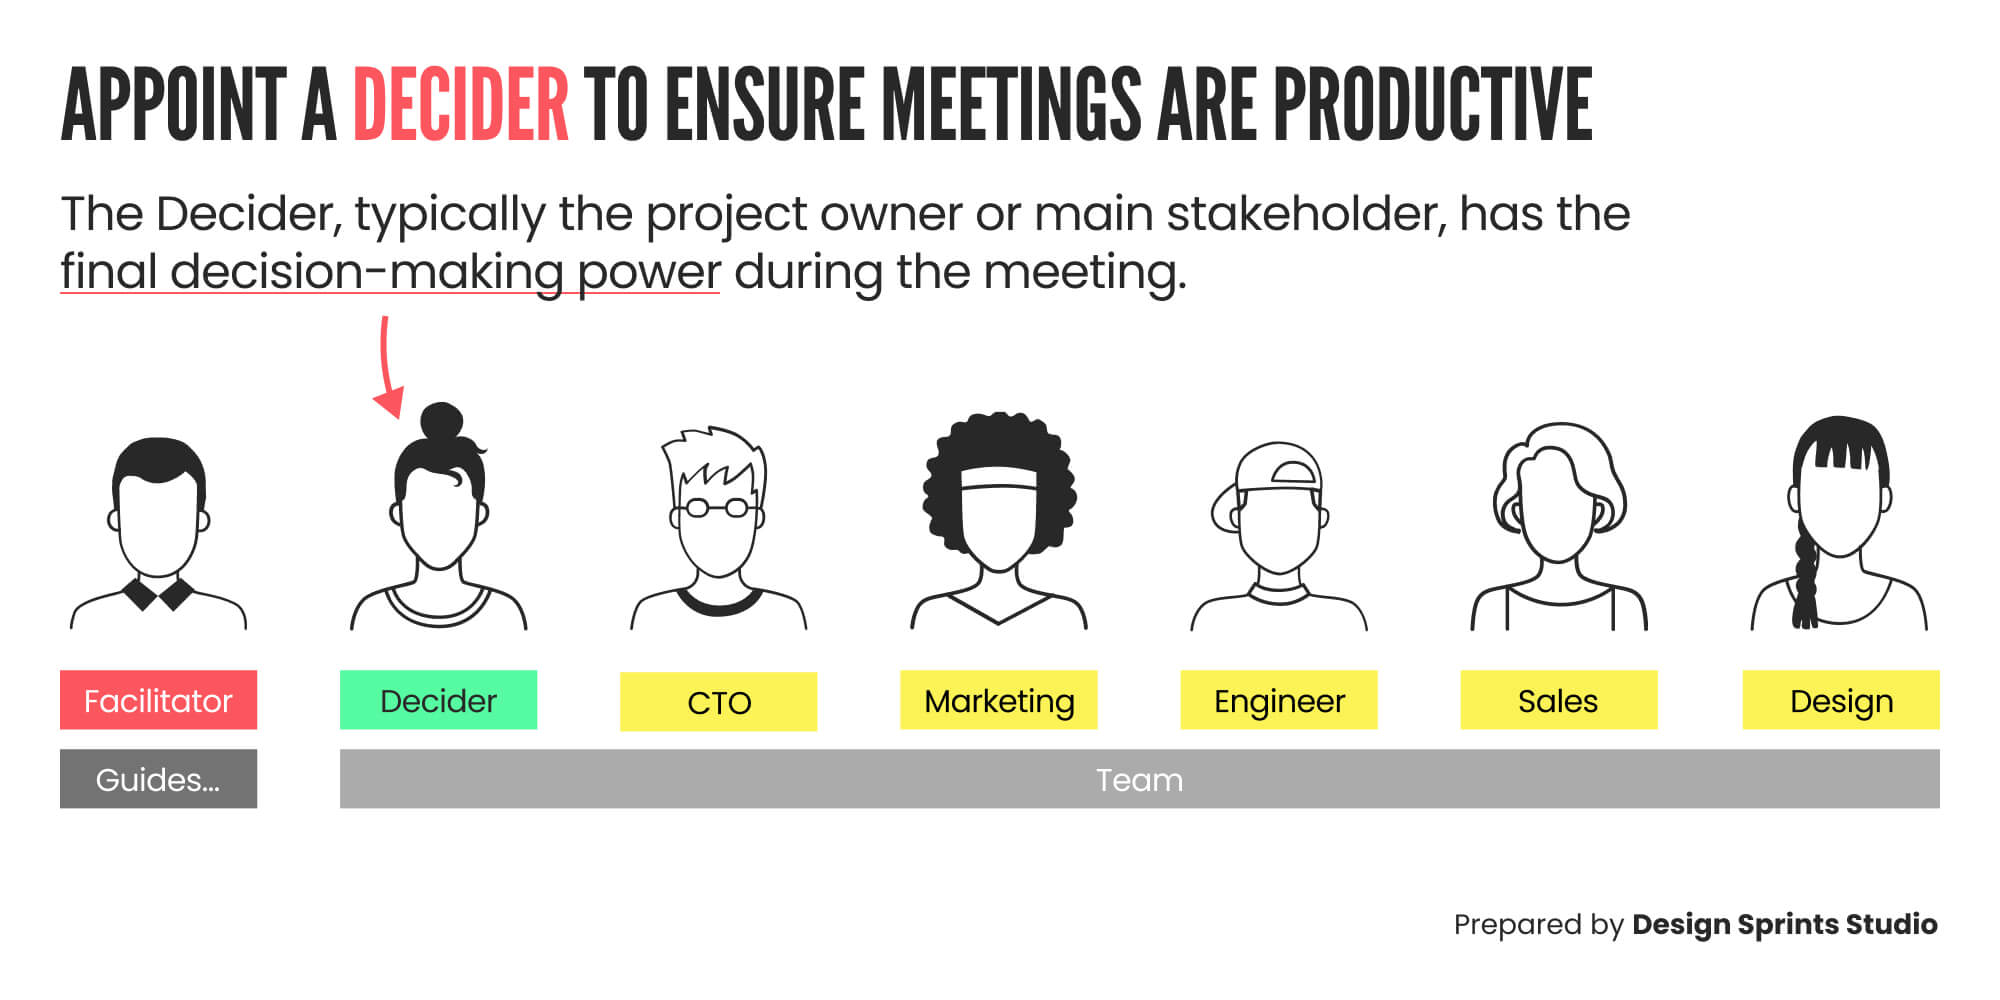 Image Appoint a decider to ensure meetings are productive